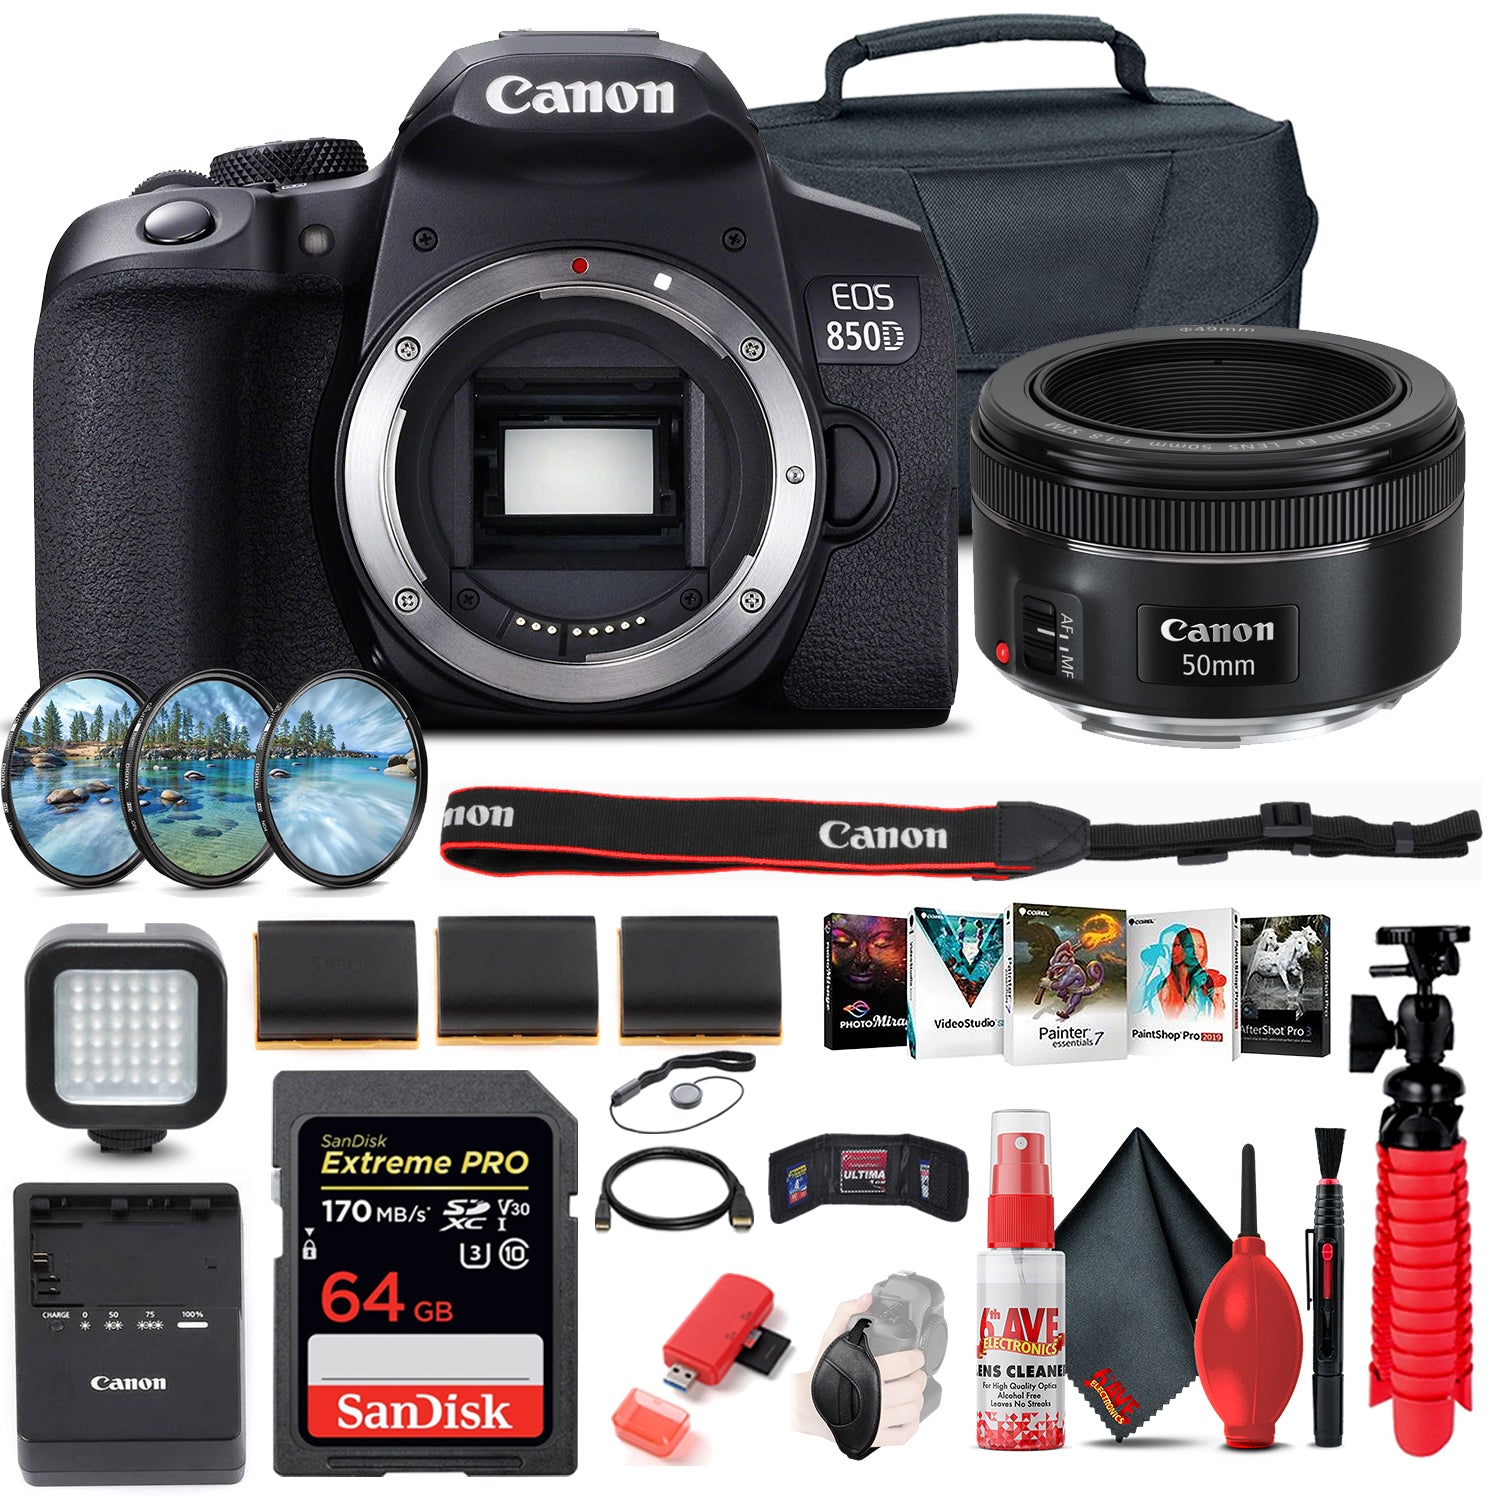 Canon EOS Rebel 850D / T8i DSLR Camera (Body Only) + Canon EF 50mm Lens + 64GB Ultimate Bundle